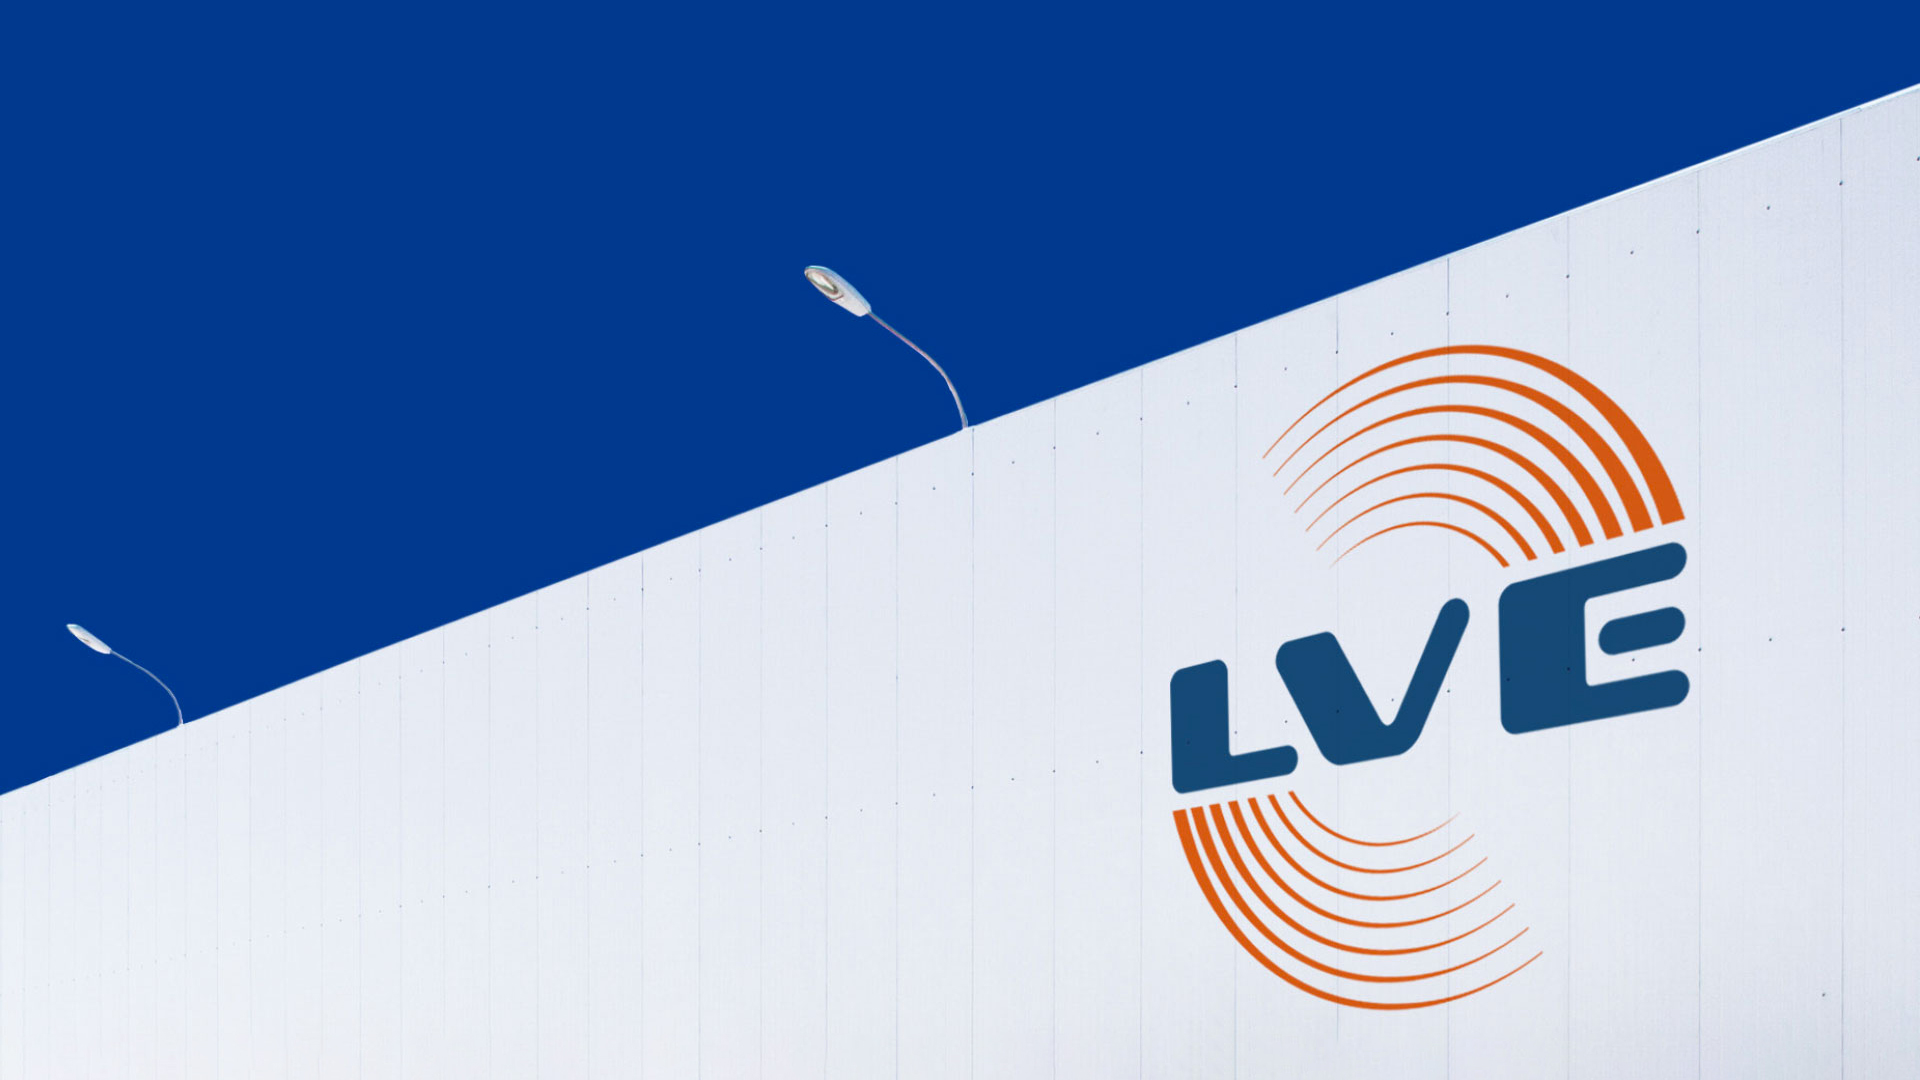 LVE is the new joint venture between Versalis and Lotte Chemical